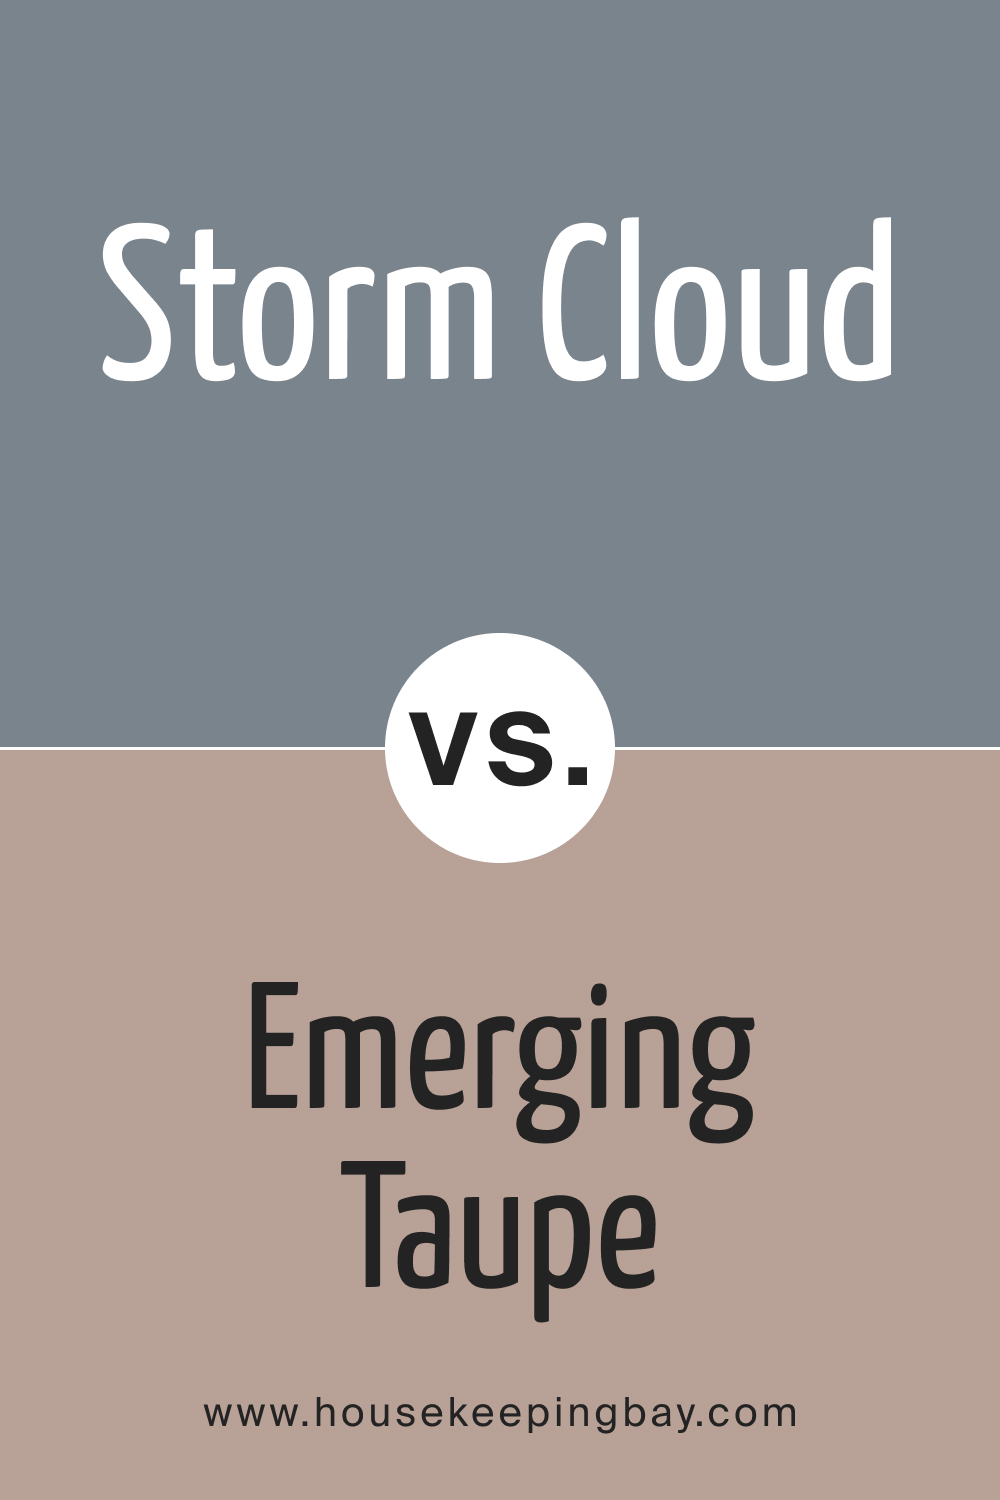 SW 6249 Storm Cloud vs. SW 6045 Emerging Taupe